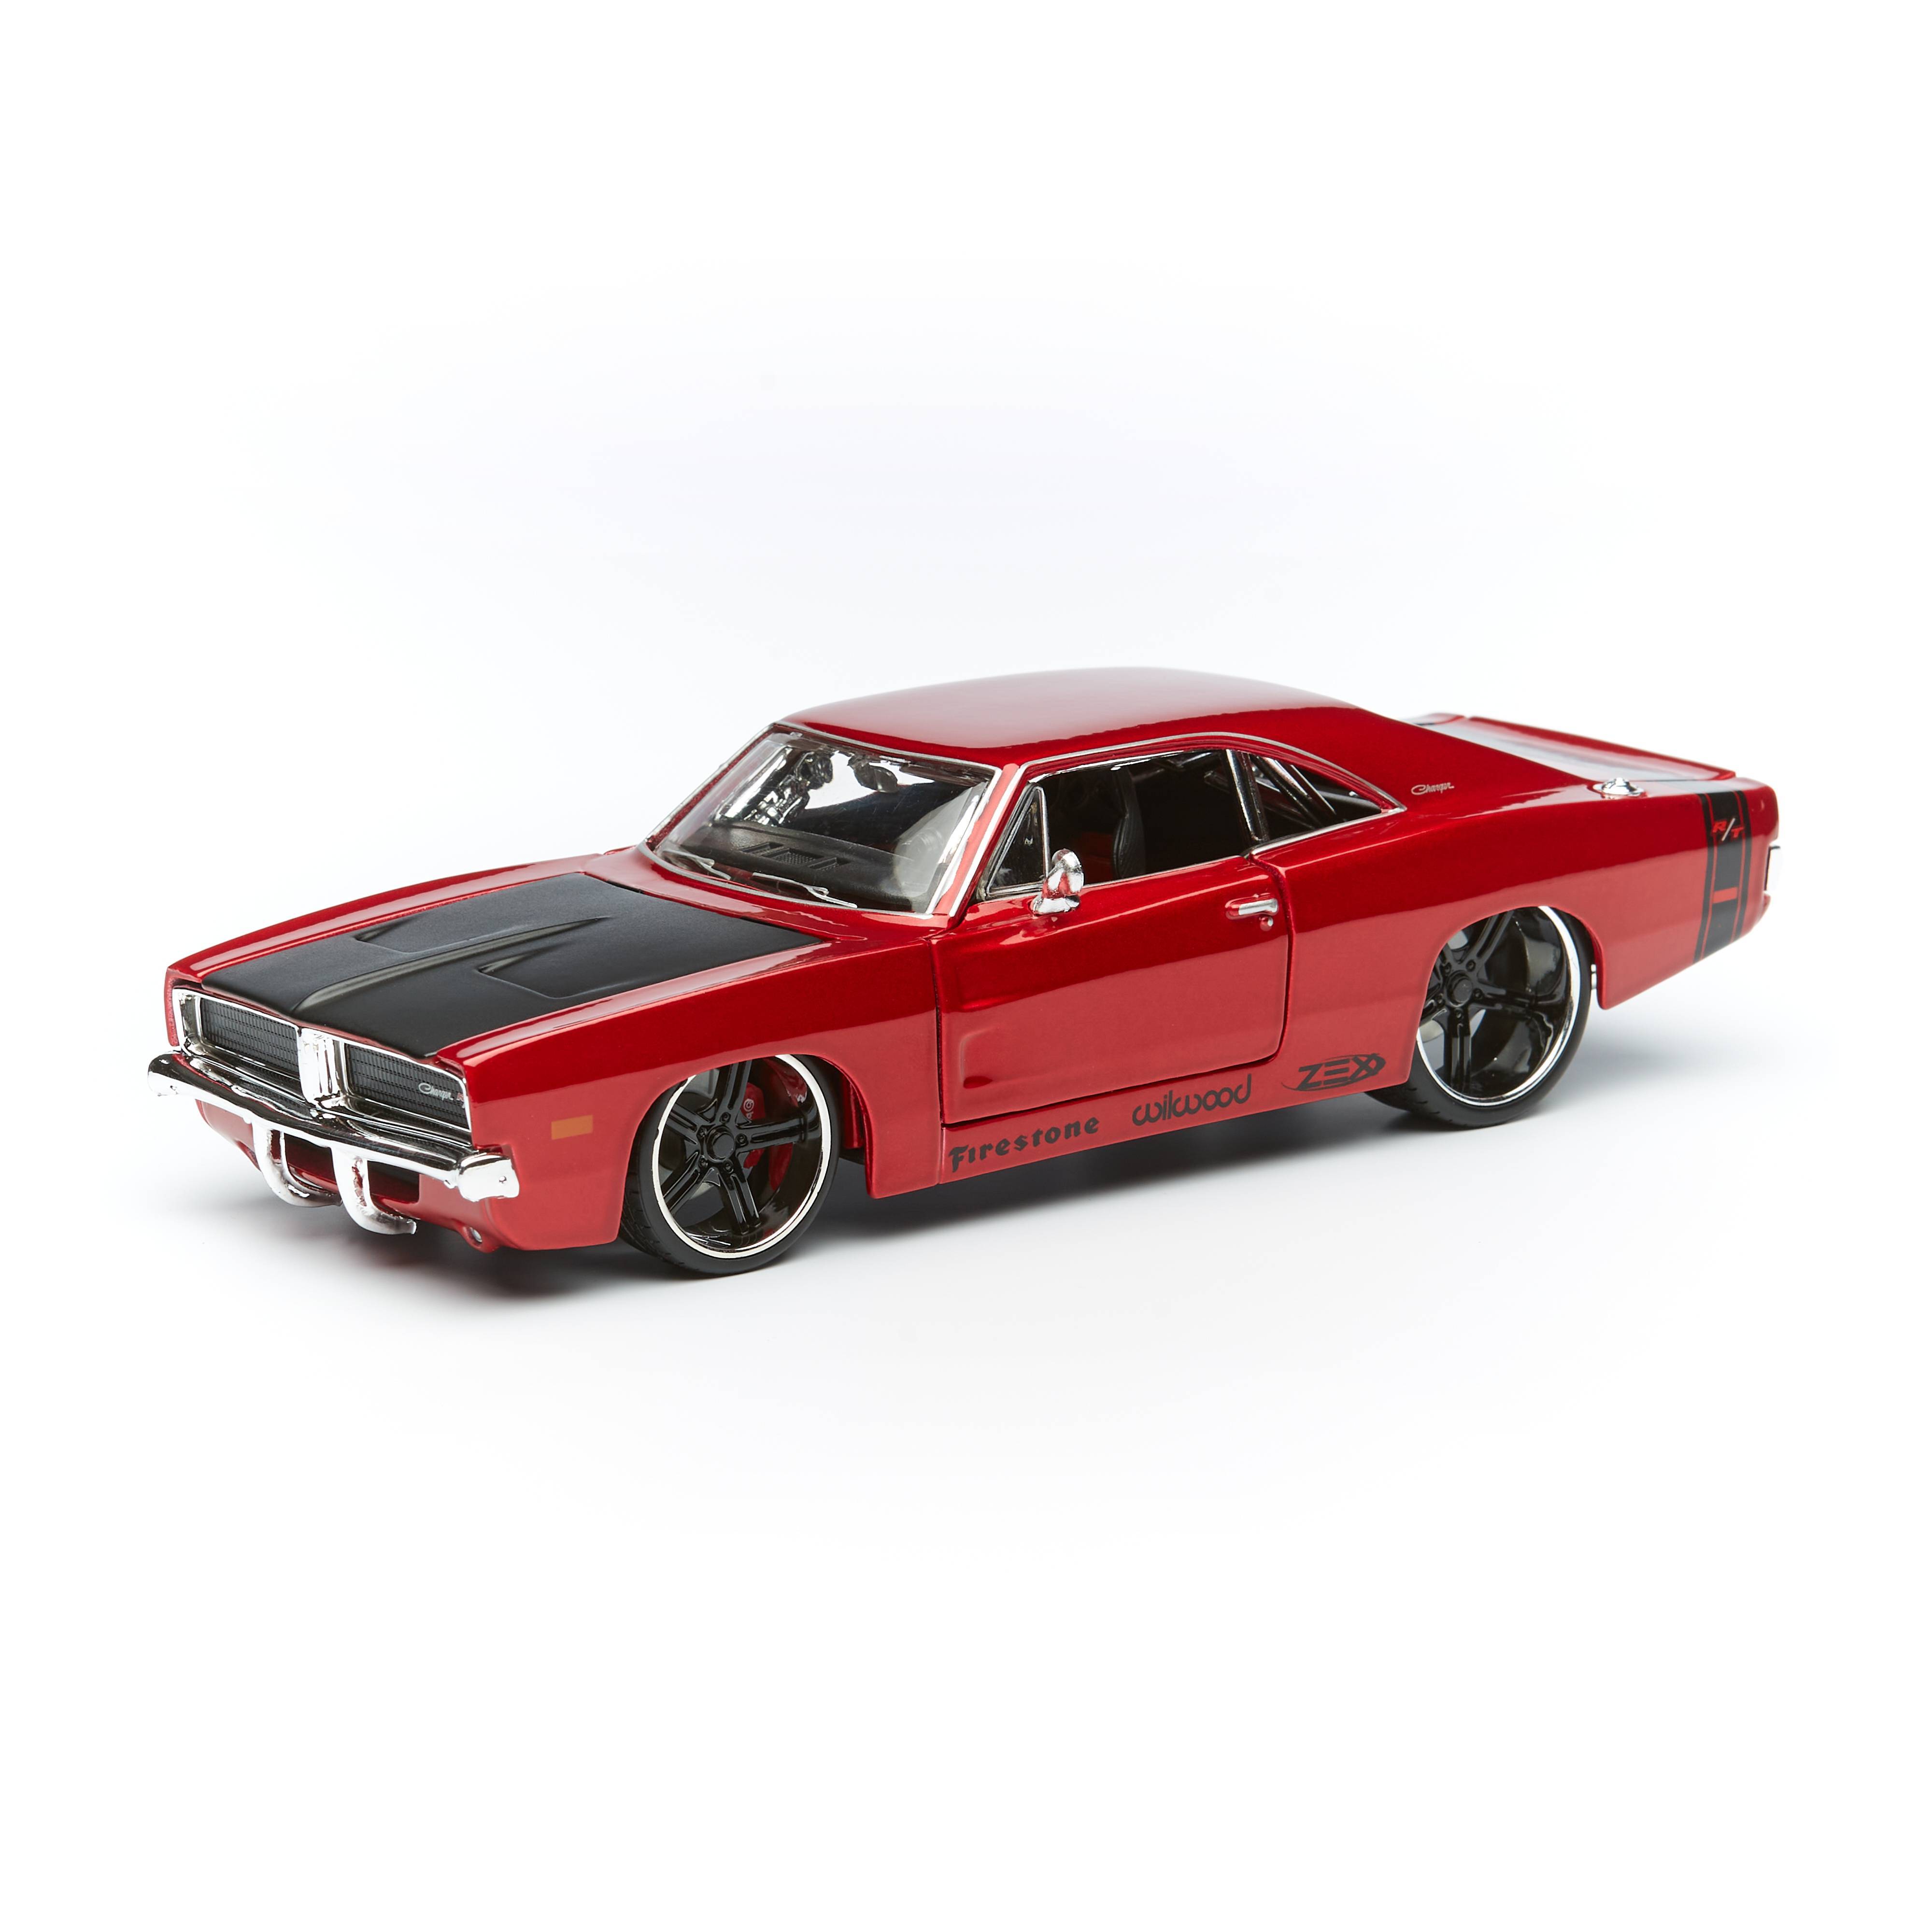 Maisto Машинка 1:25 Design Classic Muscle - 1969 Dodge Charger R/T, красная 32537 jingyuqin 433mhz id46 m3n 40821302 smart remote car key fob for chrysler 300c dodge charger journey challenge dart durango